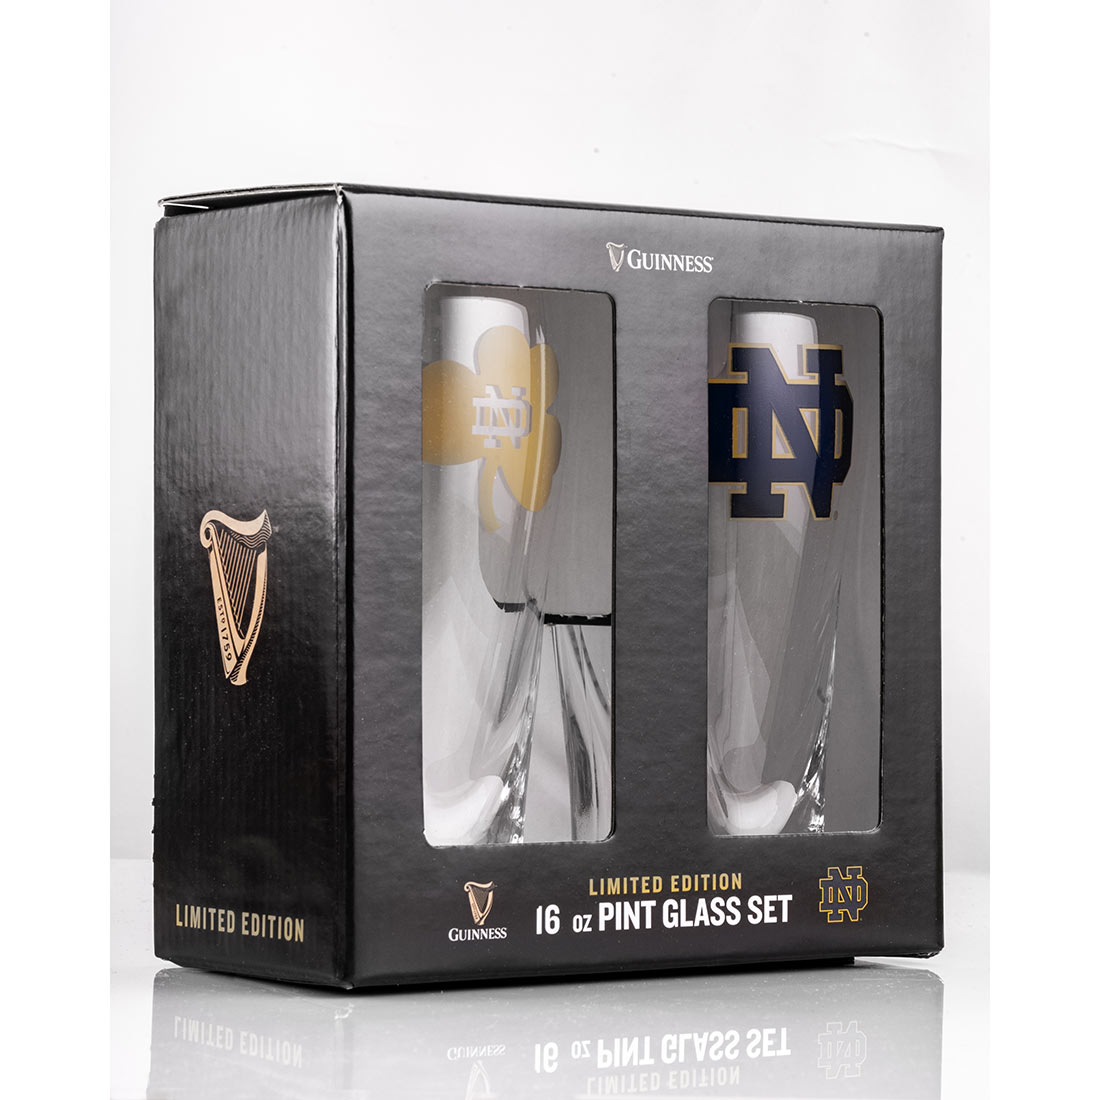 Notre Dame Guinness 16oz Pint Glass 2 Pack set featuring the iconic Guinness brand, perfect for enjoying a refreshing beverage while watching a game of football or raising a toast to Notre Dame.